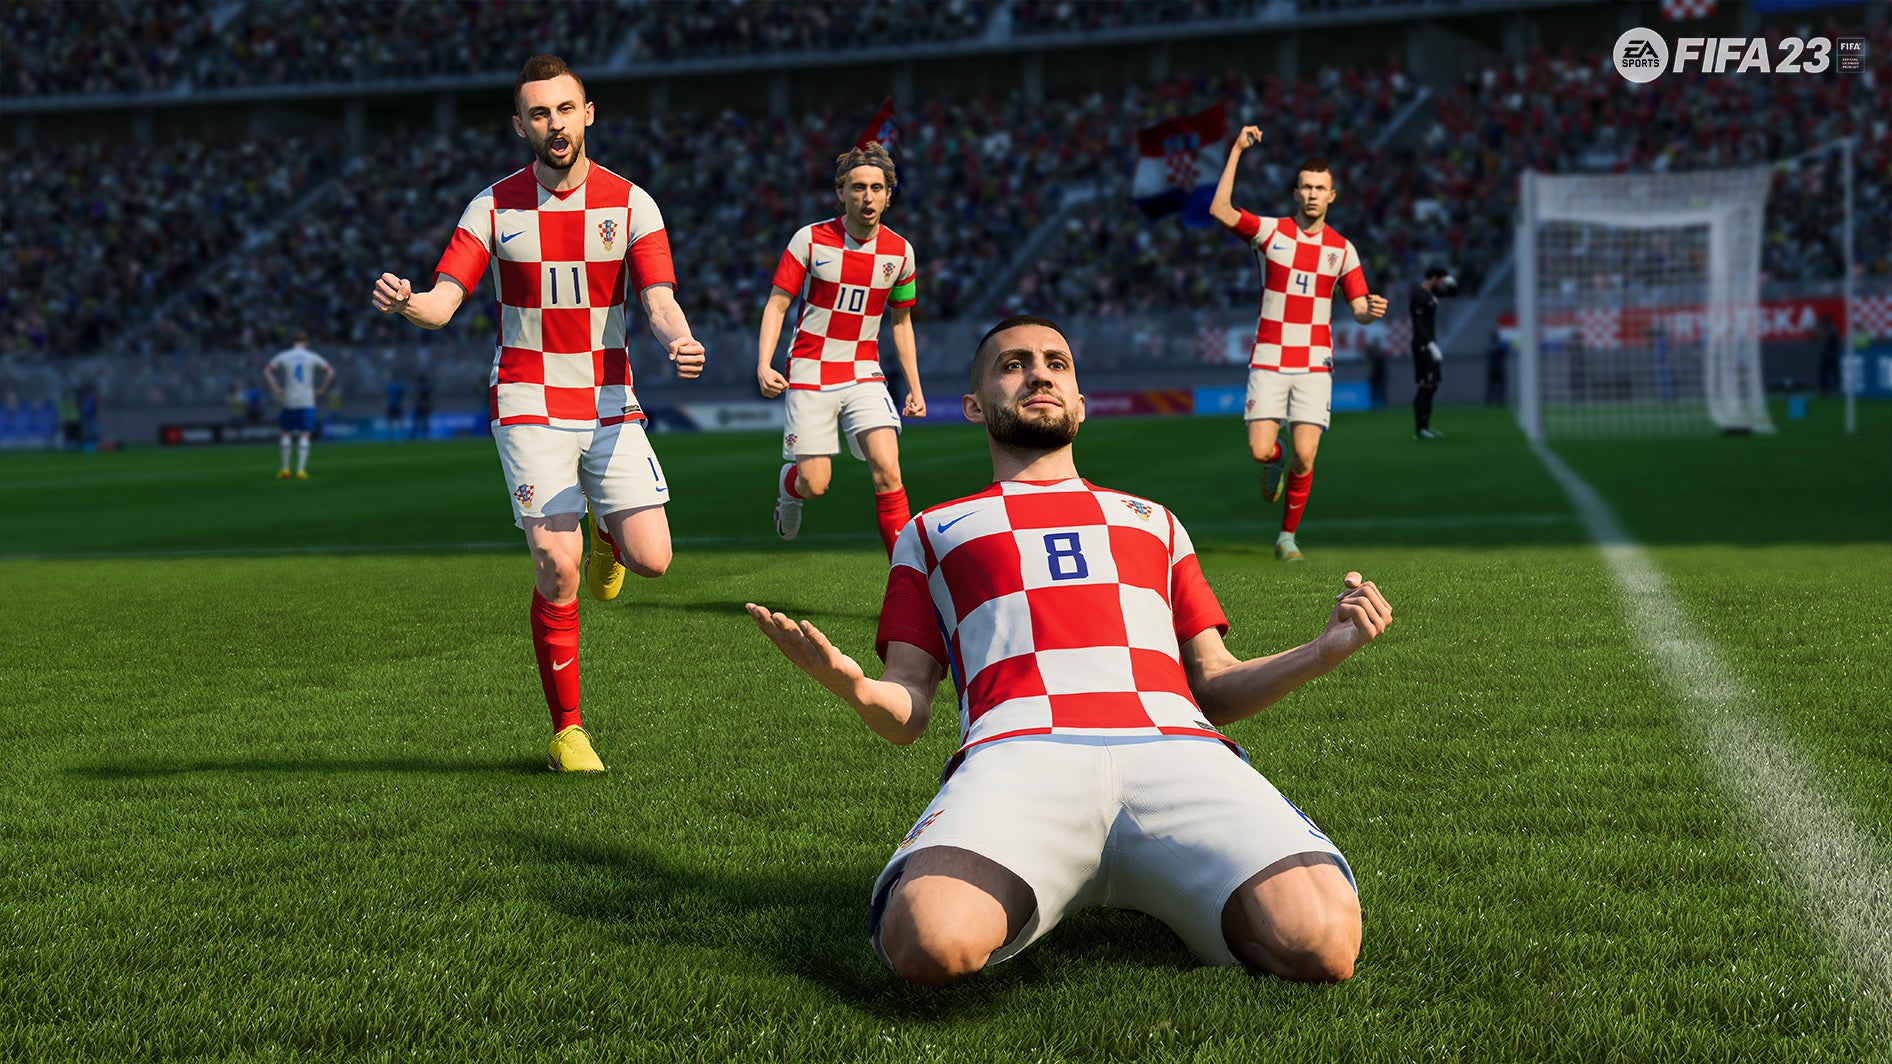 World Cup runners-up Croatia finally in FIFA 23 after 10-year absence | Eurogamer.net